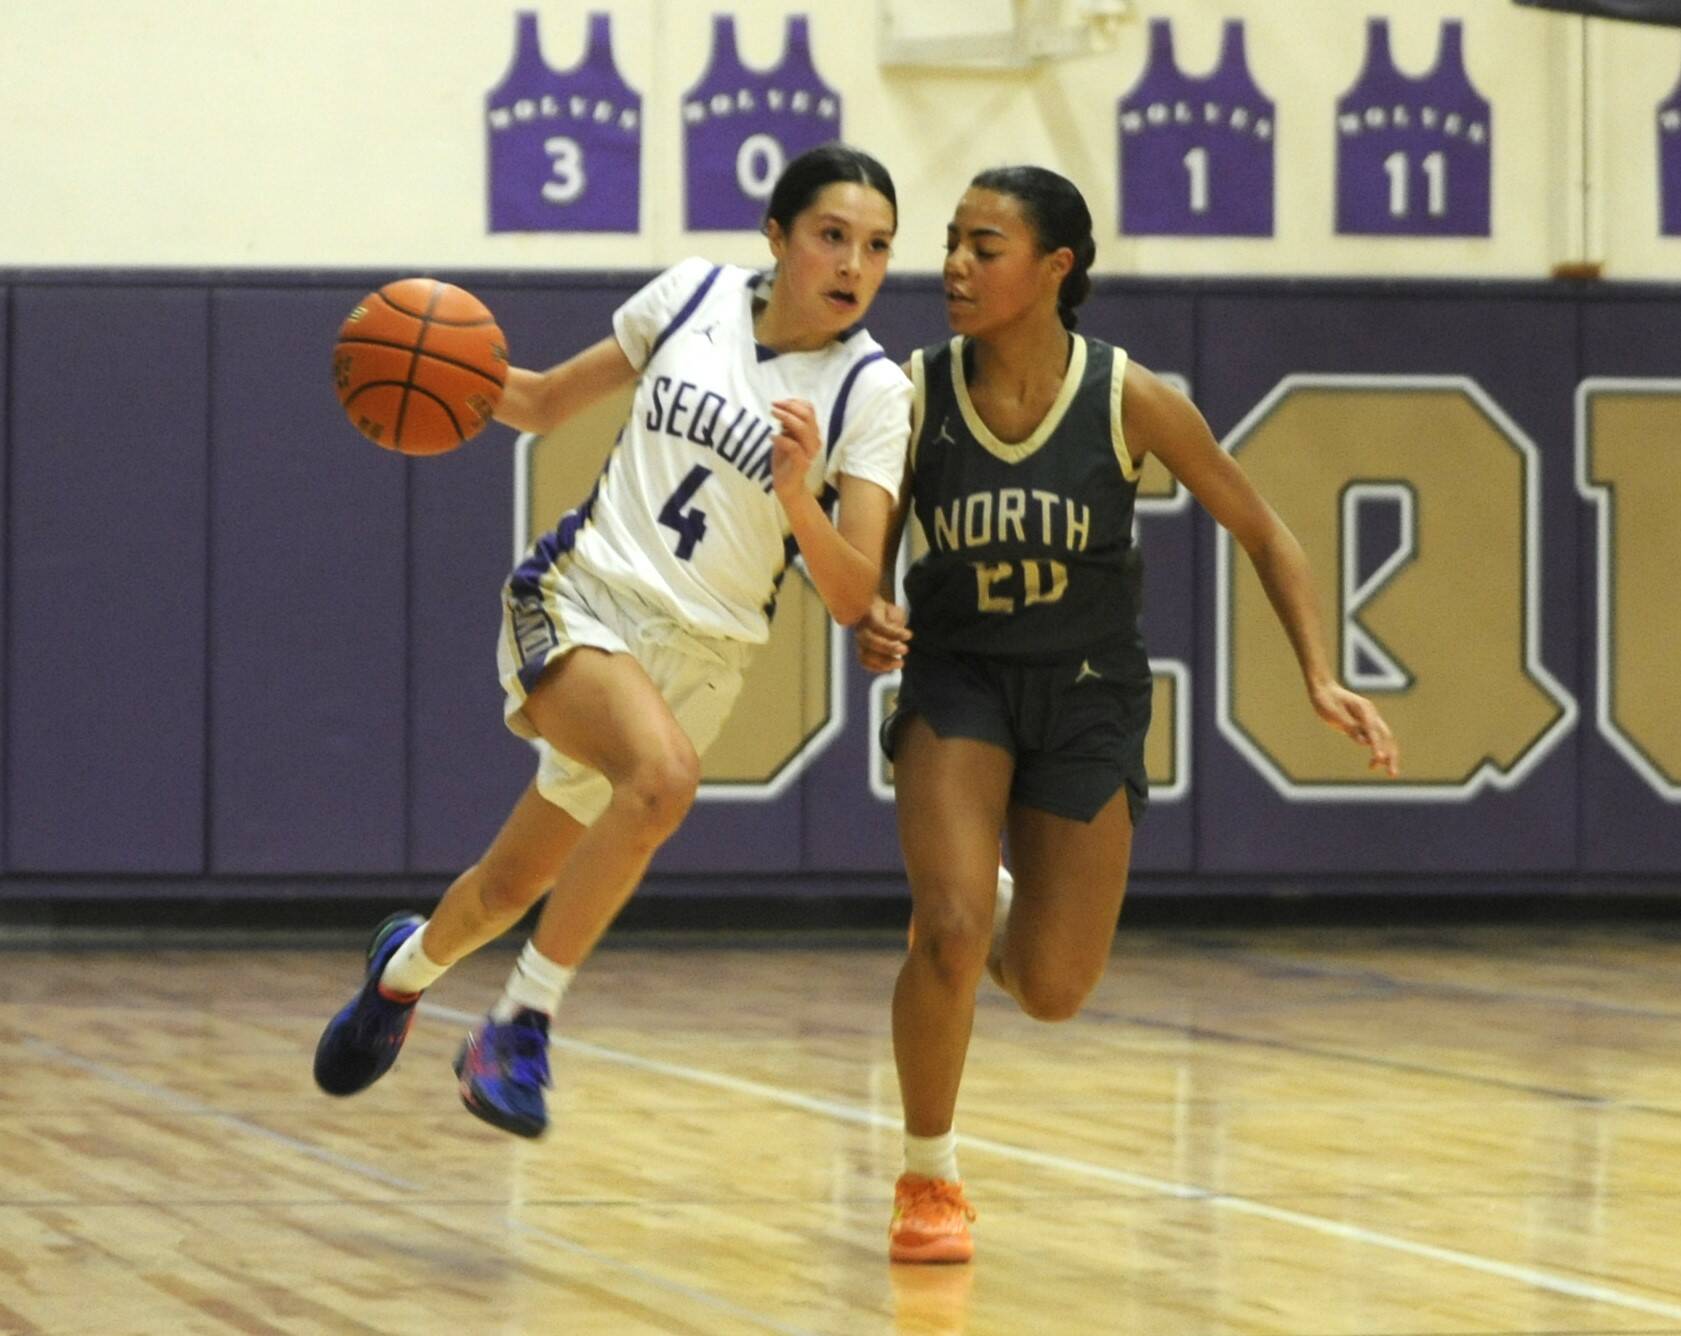 Sequim Gazette photoS by Michael Dashiell
Sequim’s Gracie Chartraw, left, drives by North Kitsap’s Coriana McMillian in the Wolves’ 56-40 win on Dec. 15.